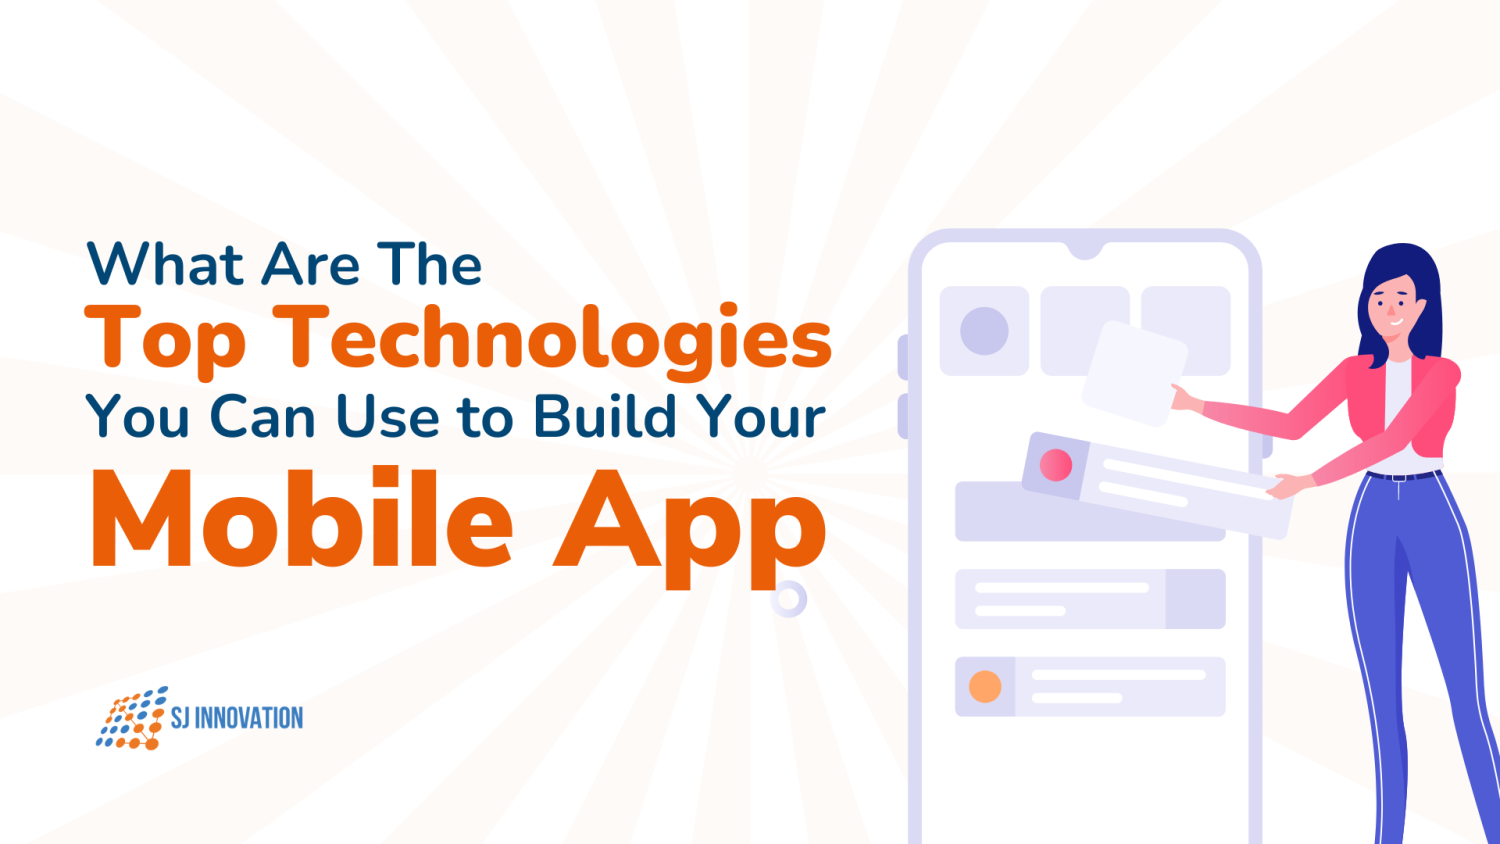 What are the Top Technologies You Can Use to Build Your Mobile App